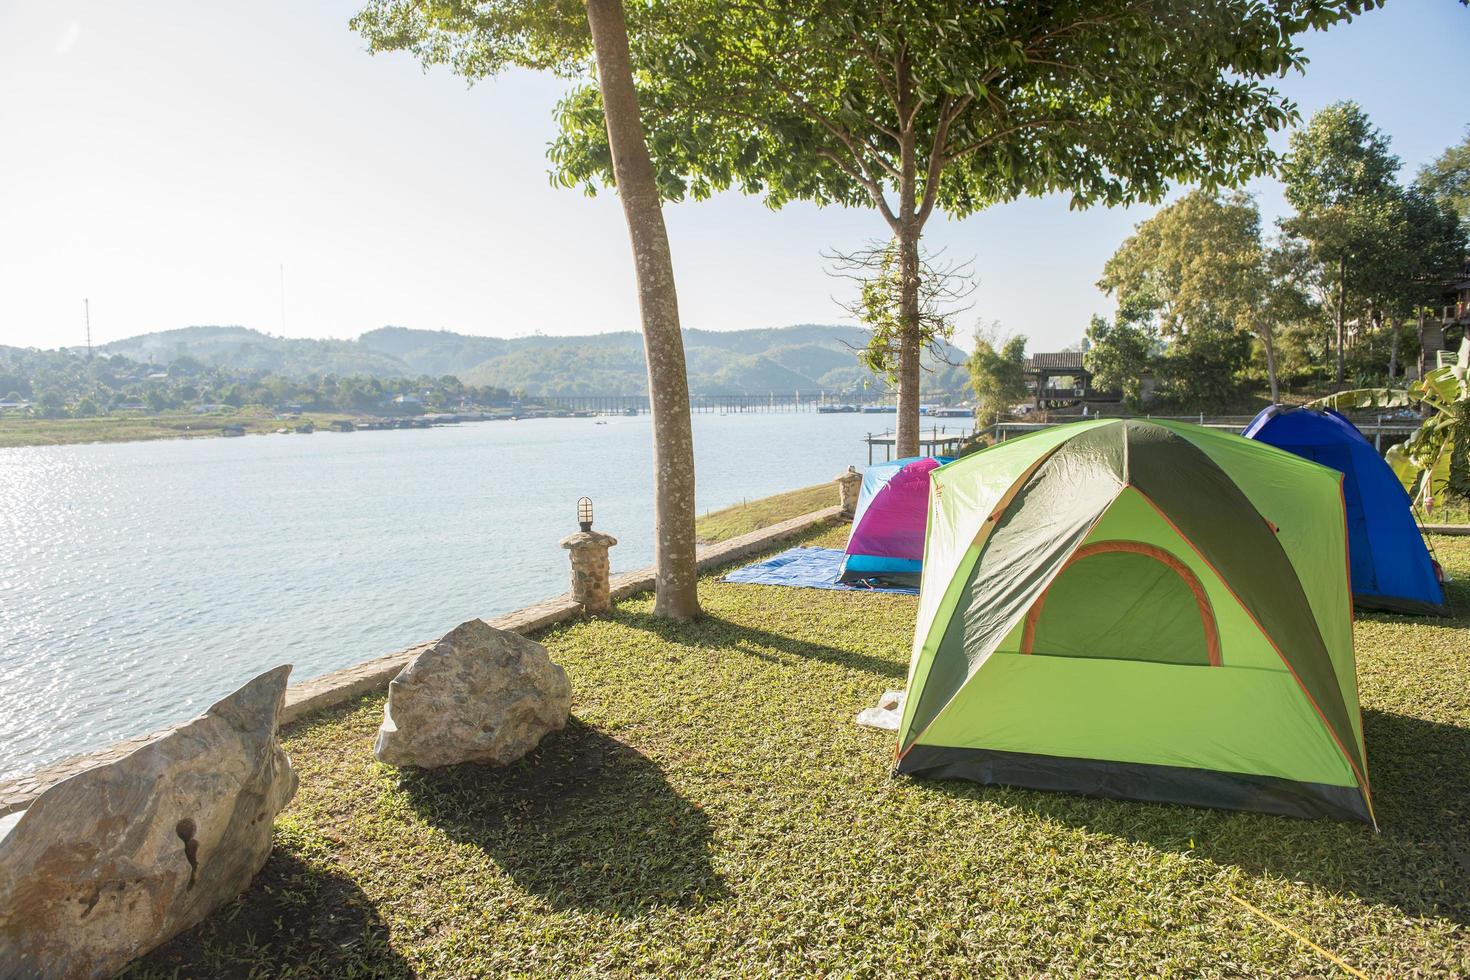 Tent camping on a lake photo